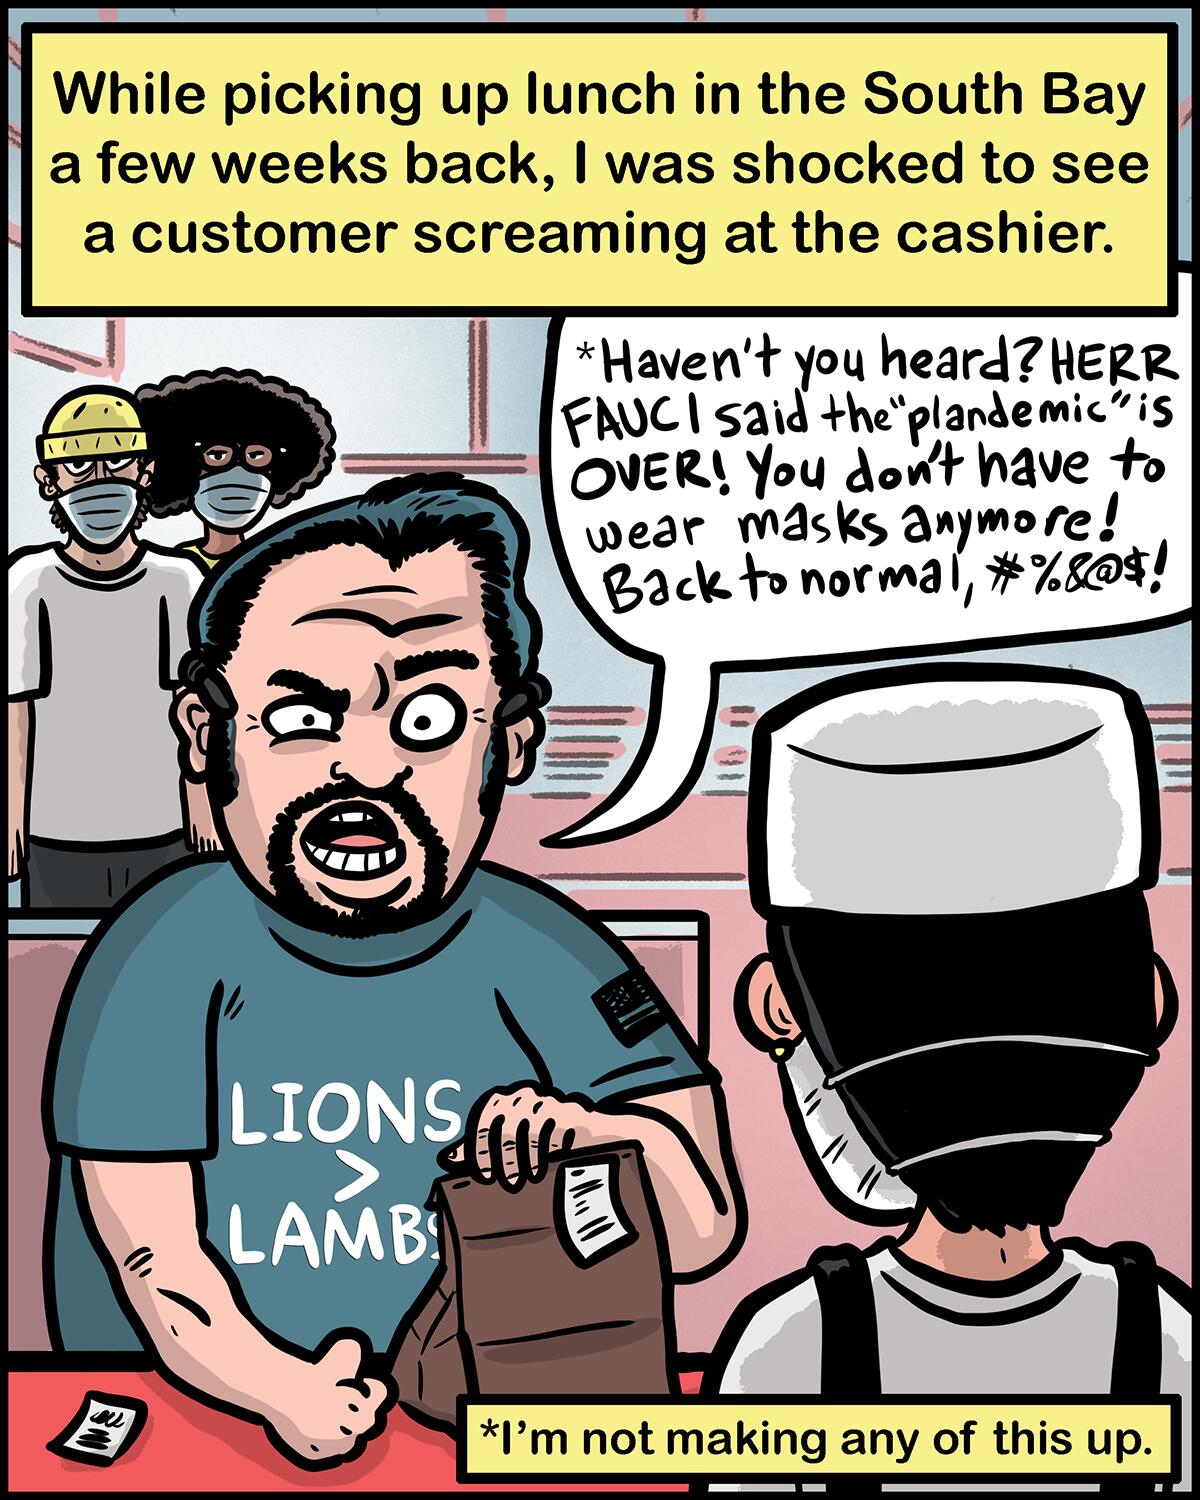 A customer is rude to a clerk while a couple wearing masks watches.